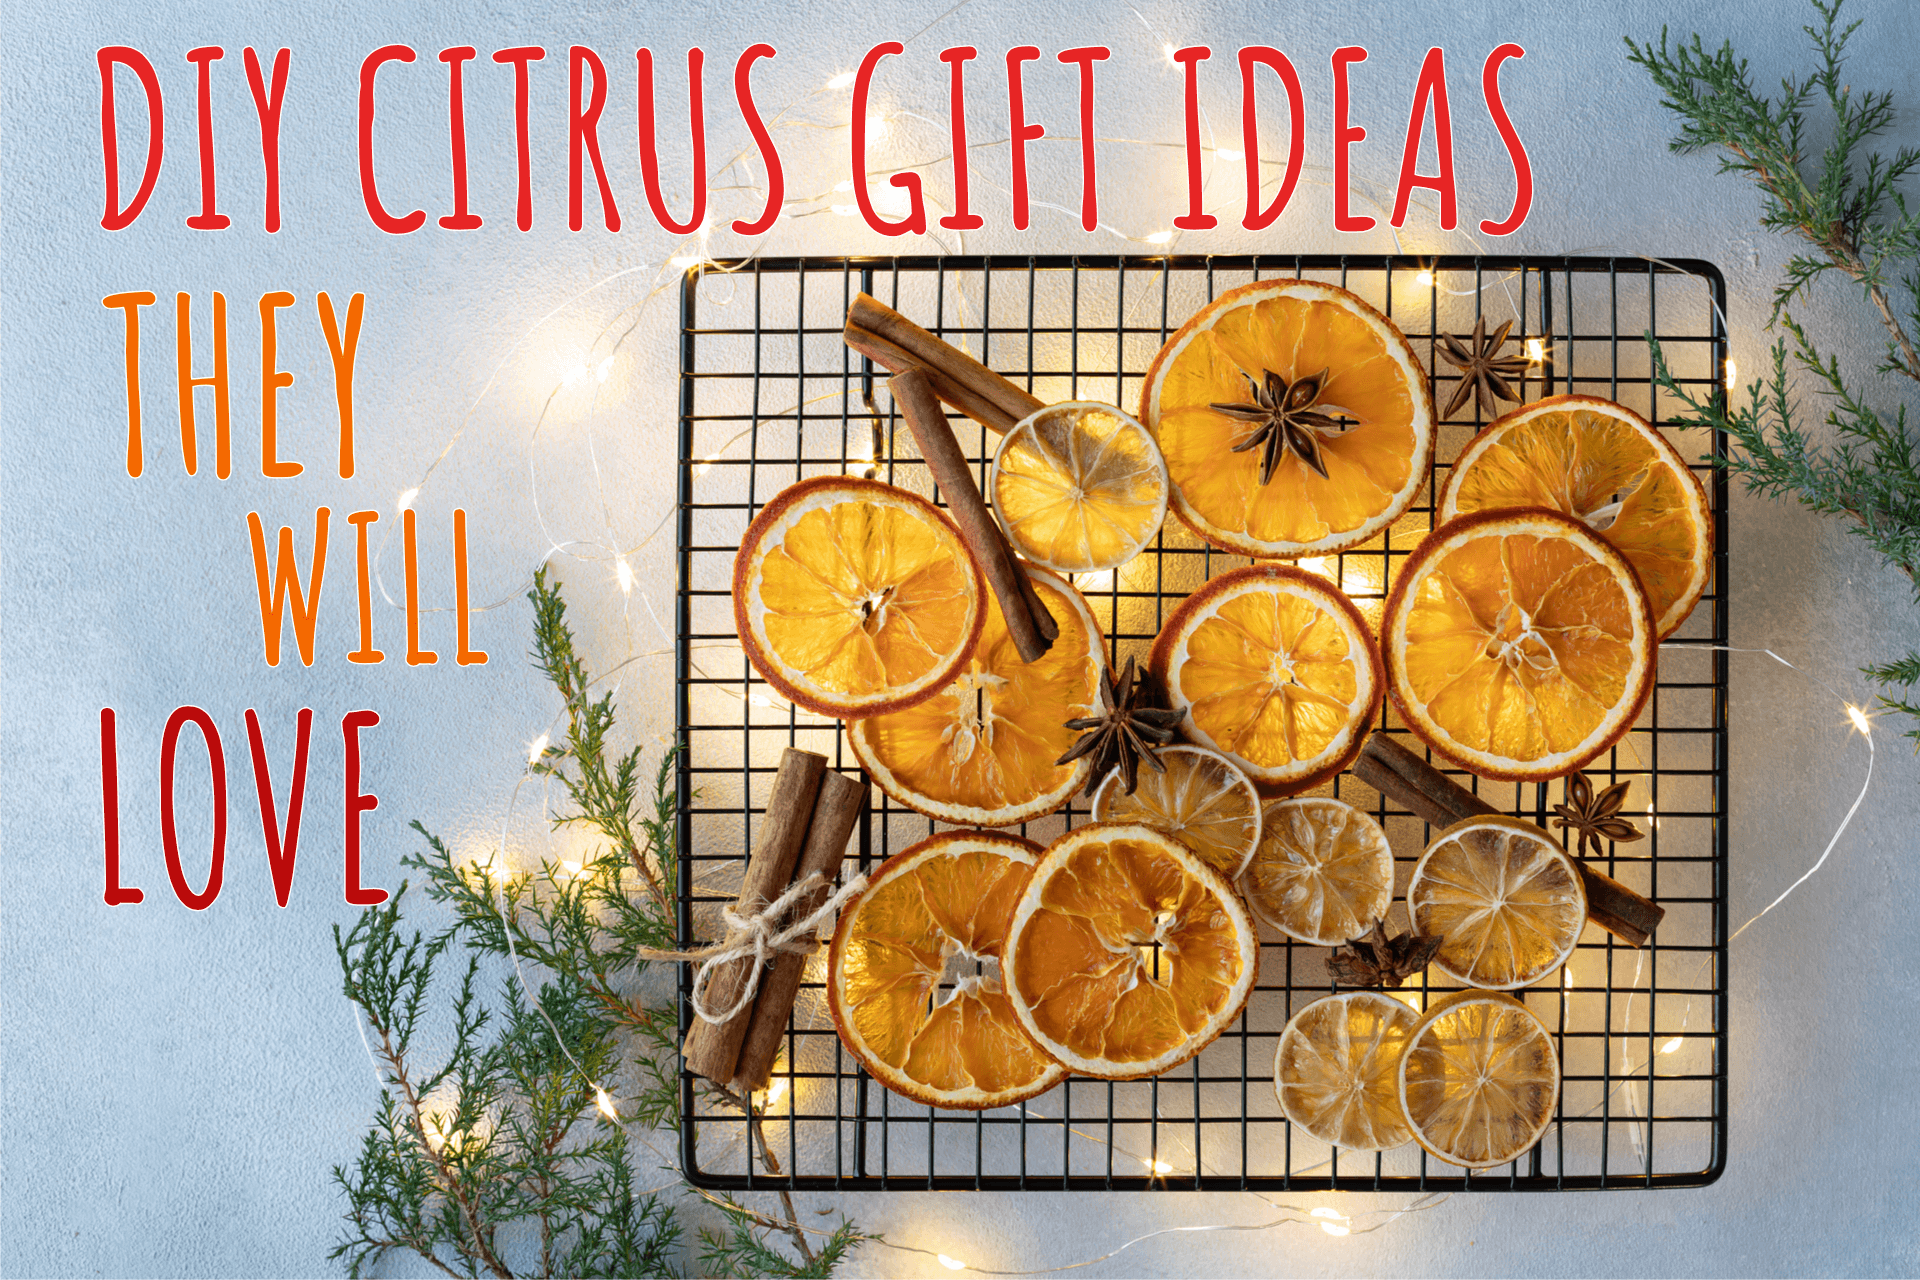 DIY Citrus Gifts Ideas They Will Love